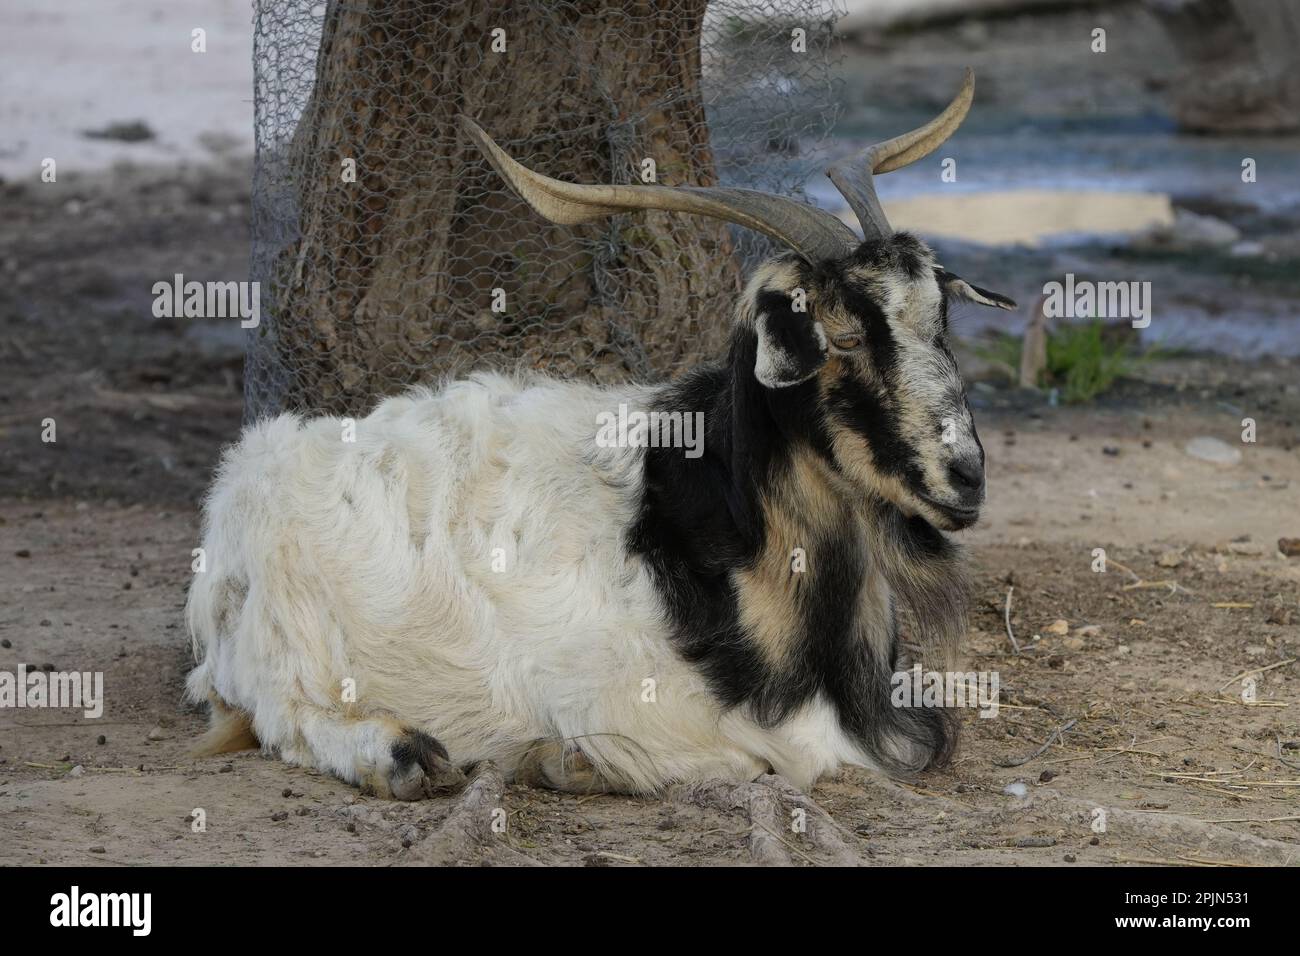 A black and white Fainting goat lying on the ground next to a tree Stock Photo